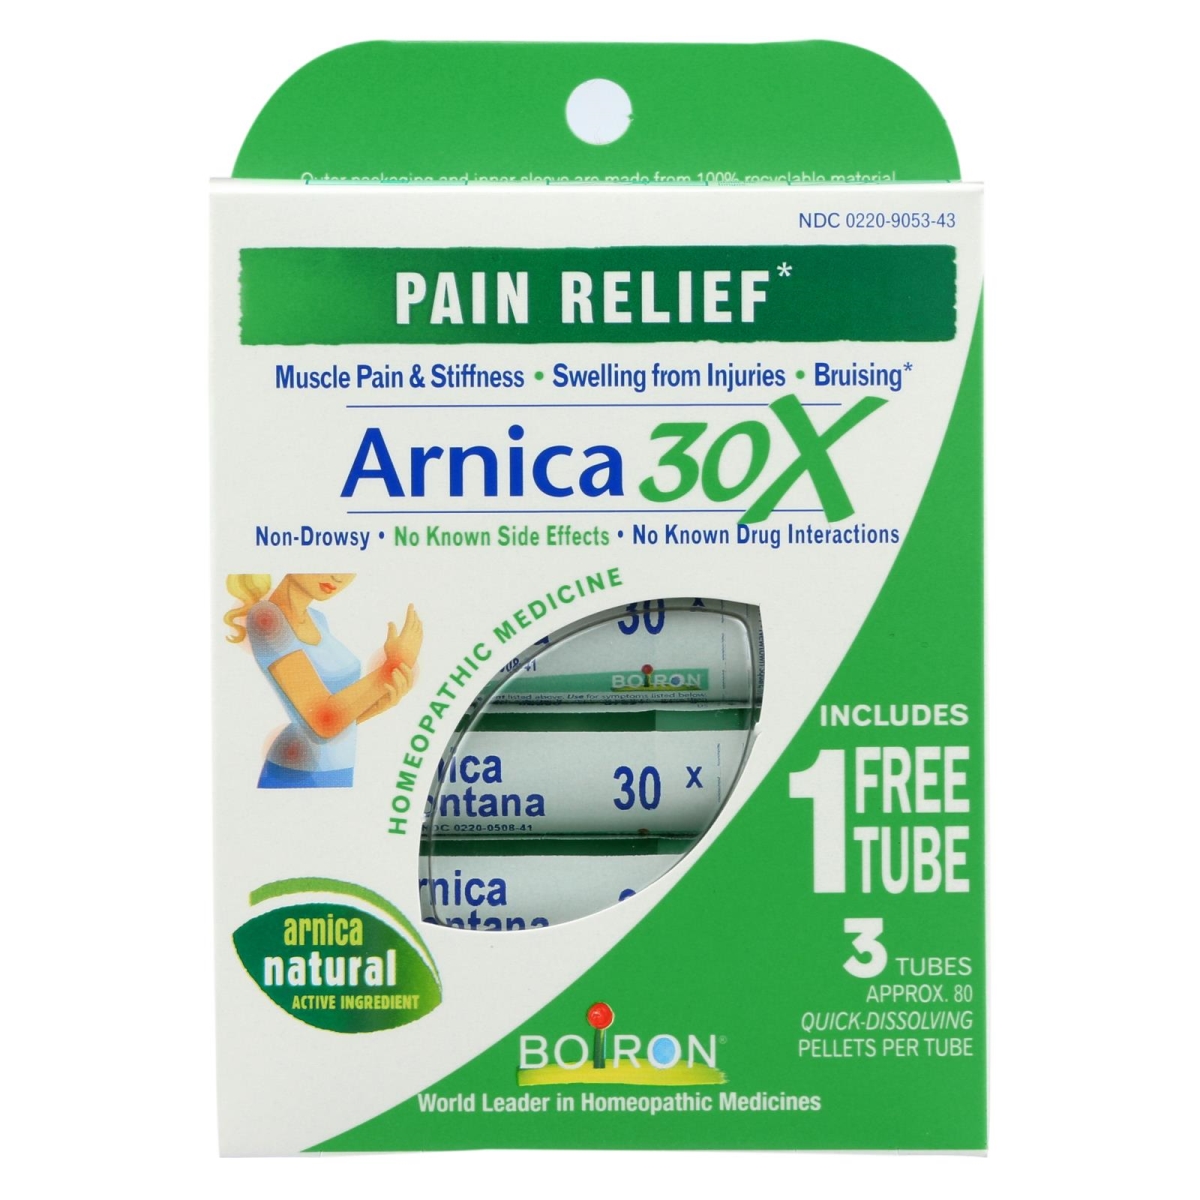 2314193 Arnicare 30x Pain Relief Tube - 3 Count